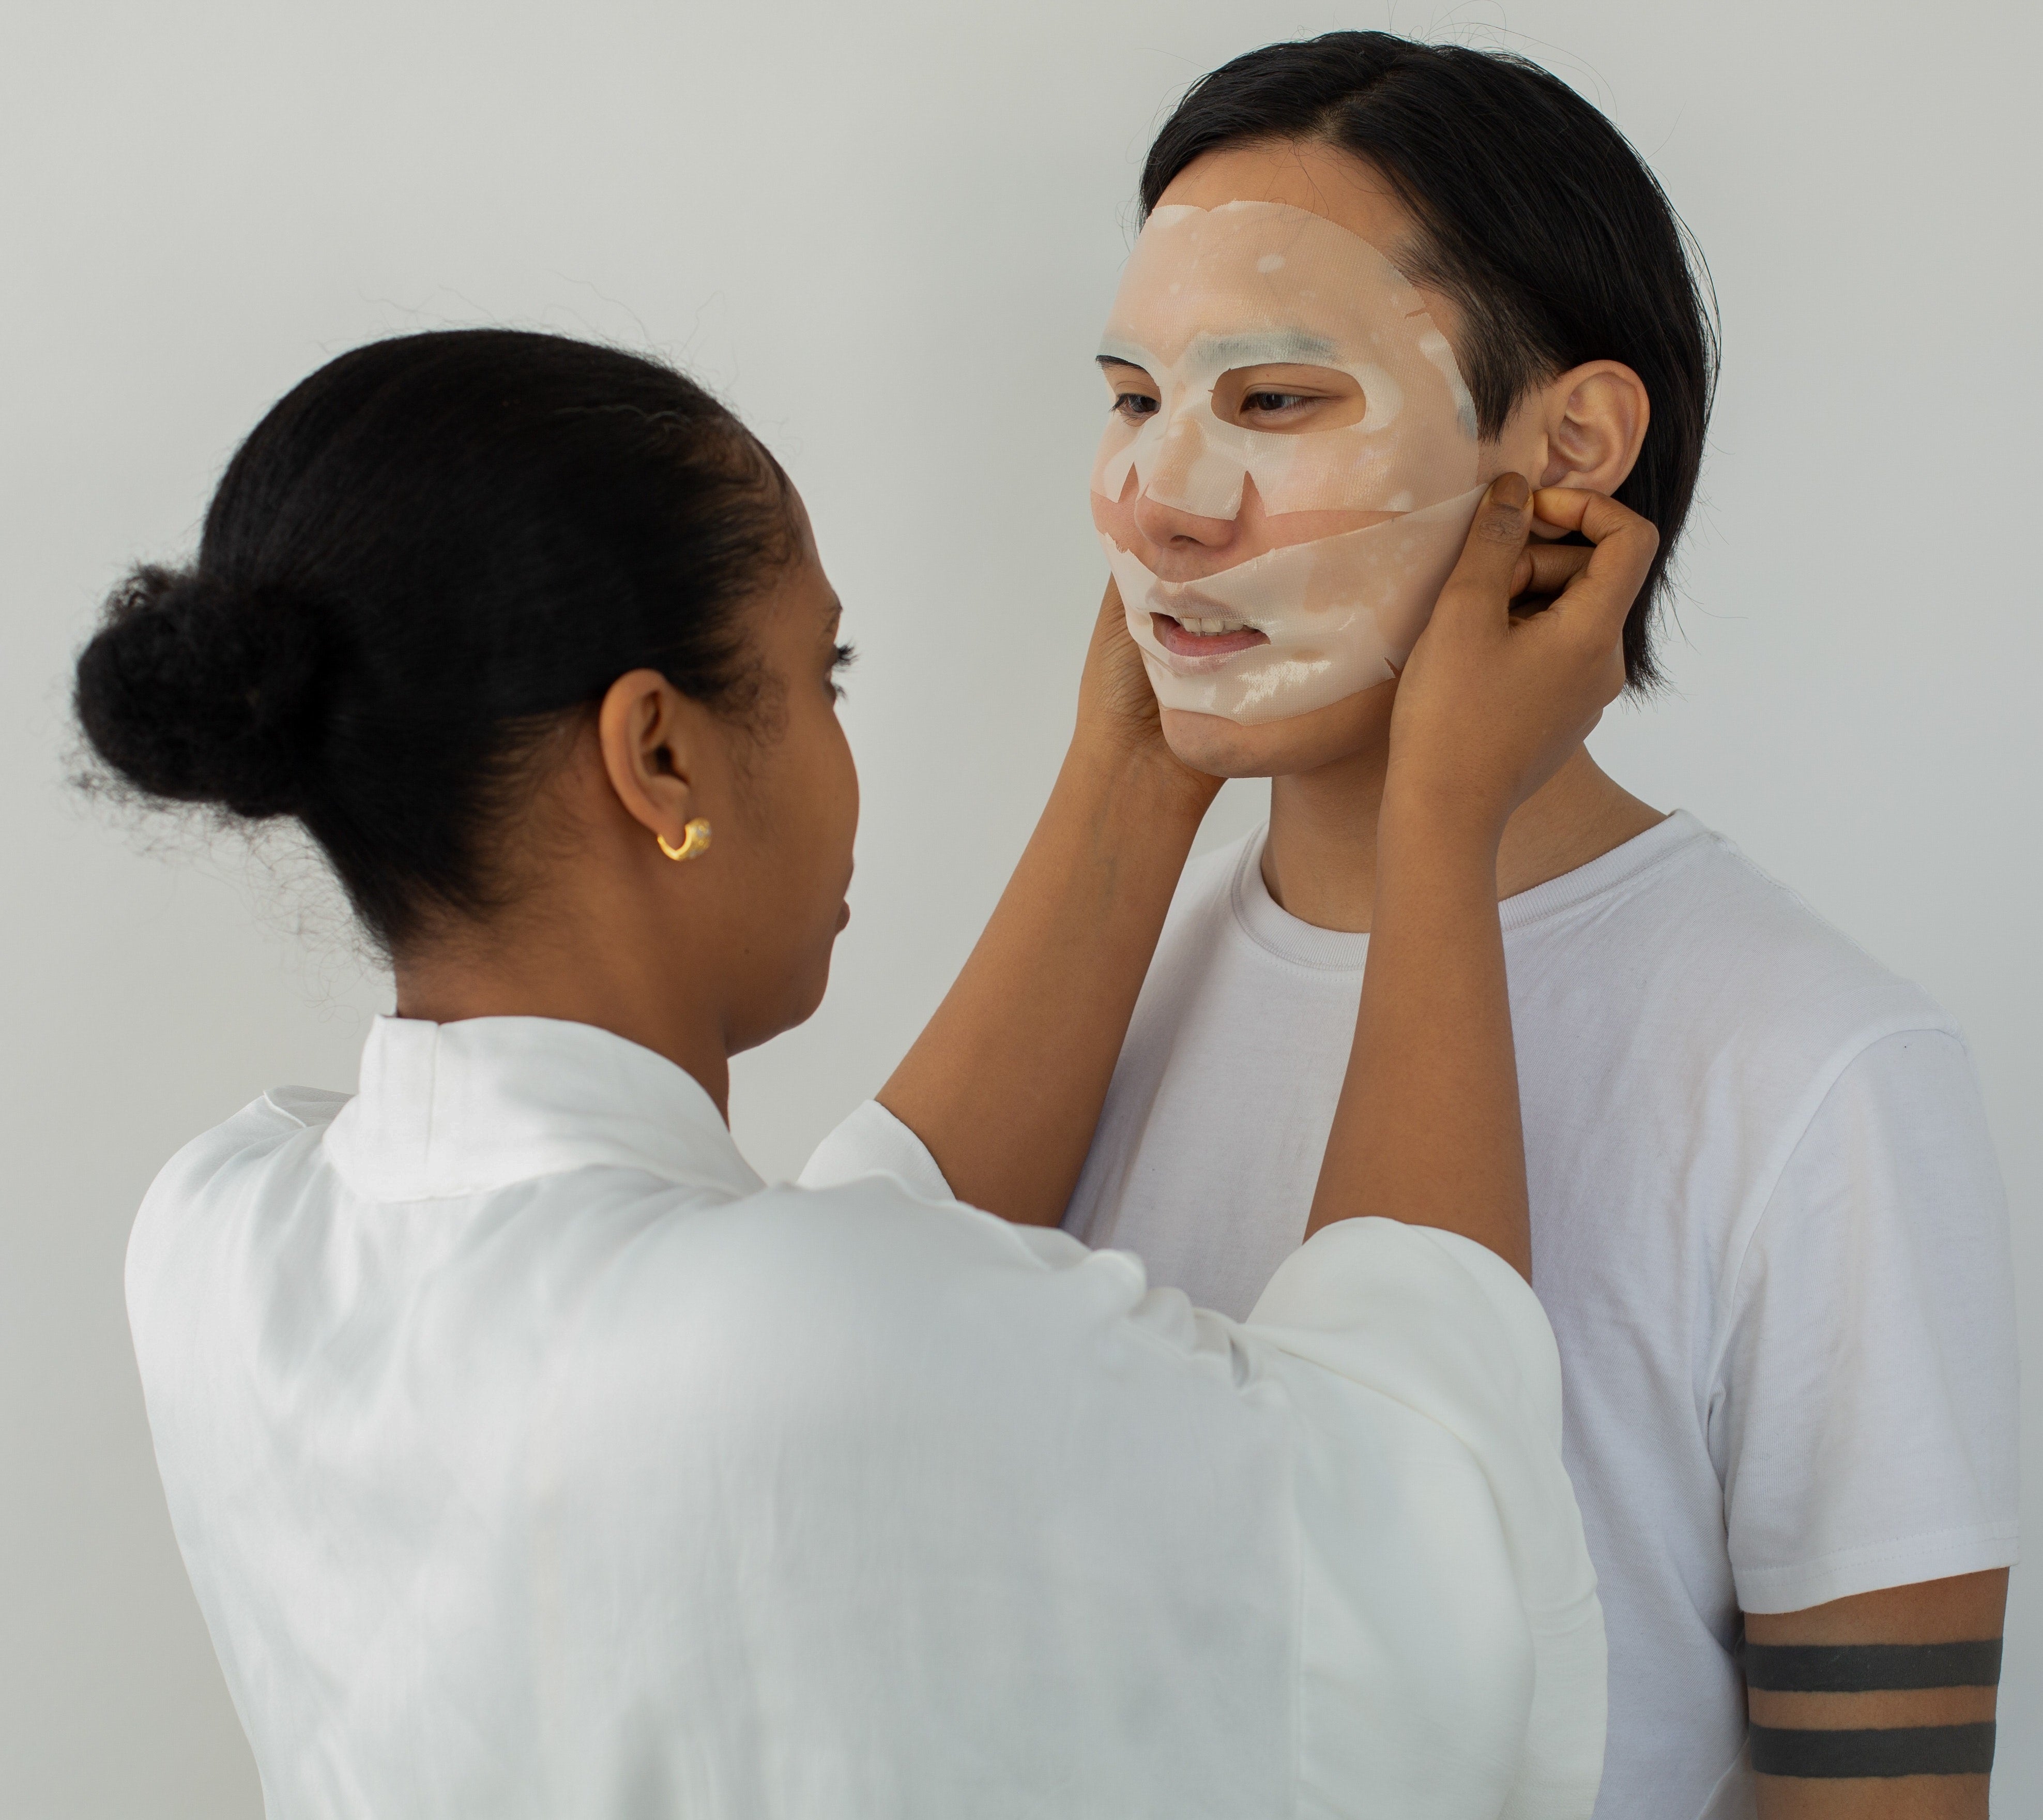 Dermatologist vs Esthetician: Who to Consult for Your Skincare Needs